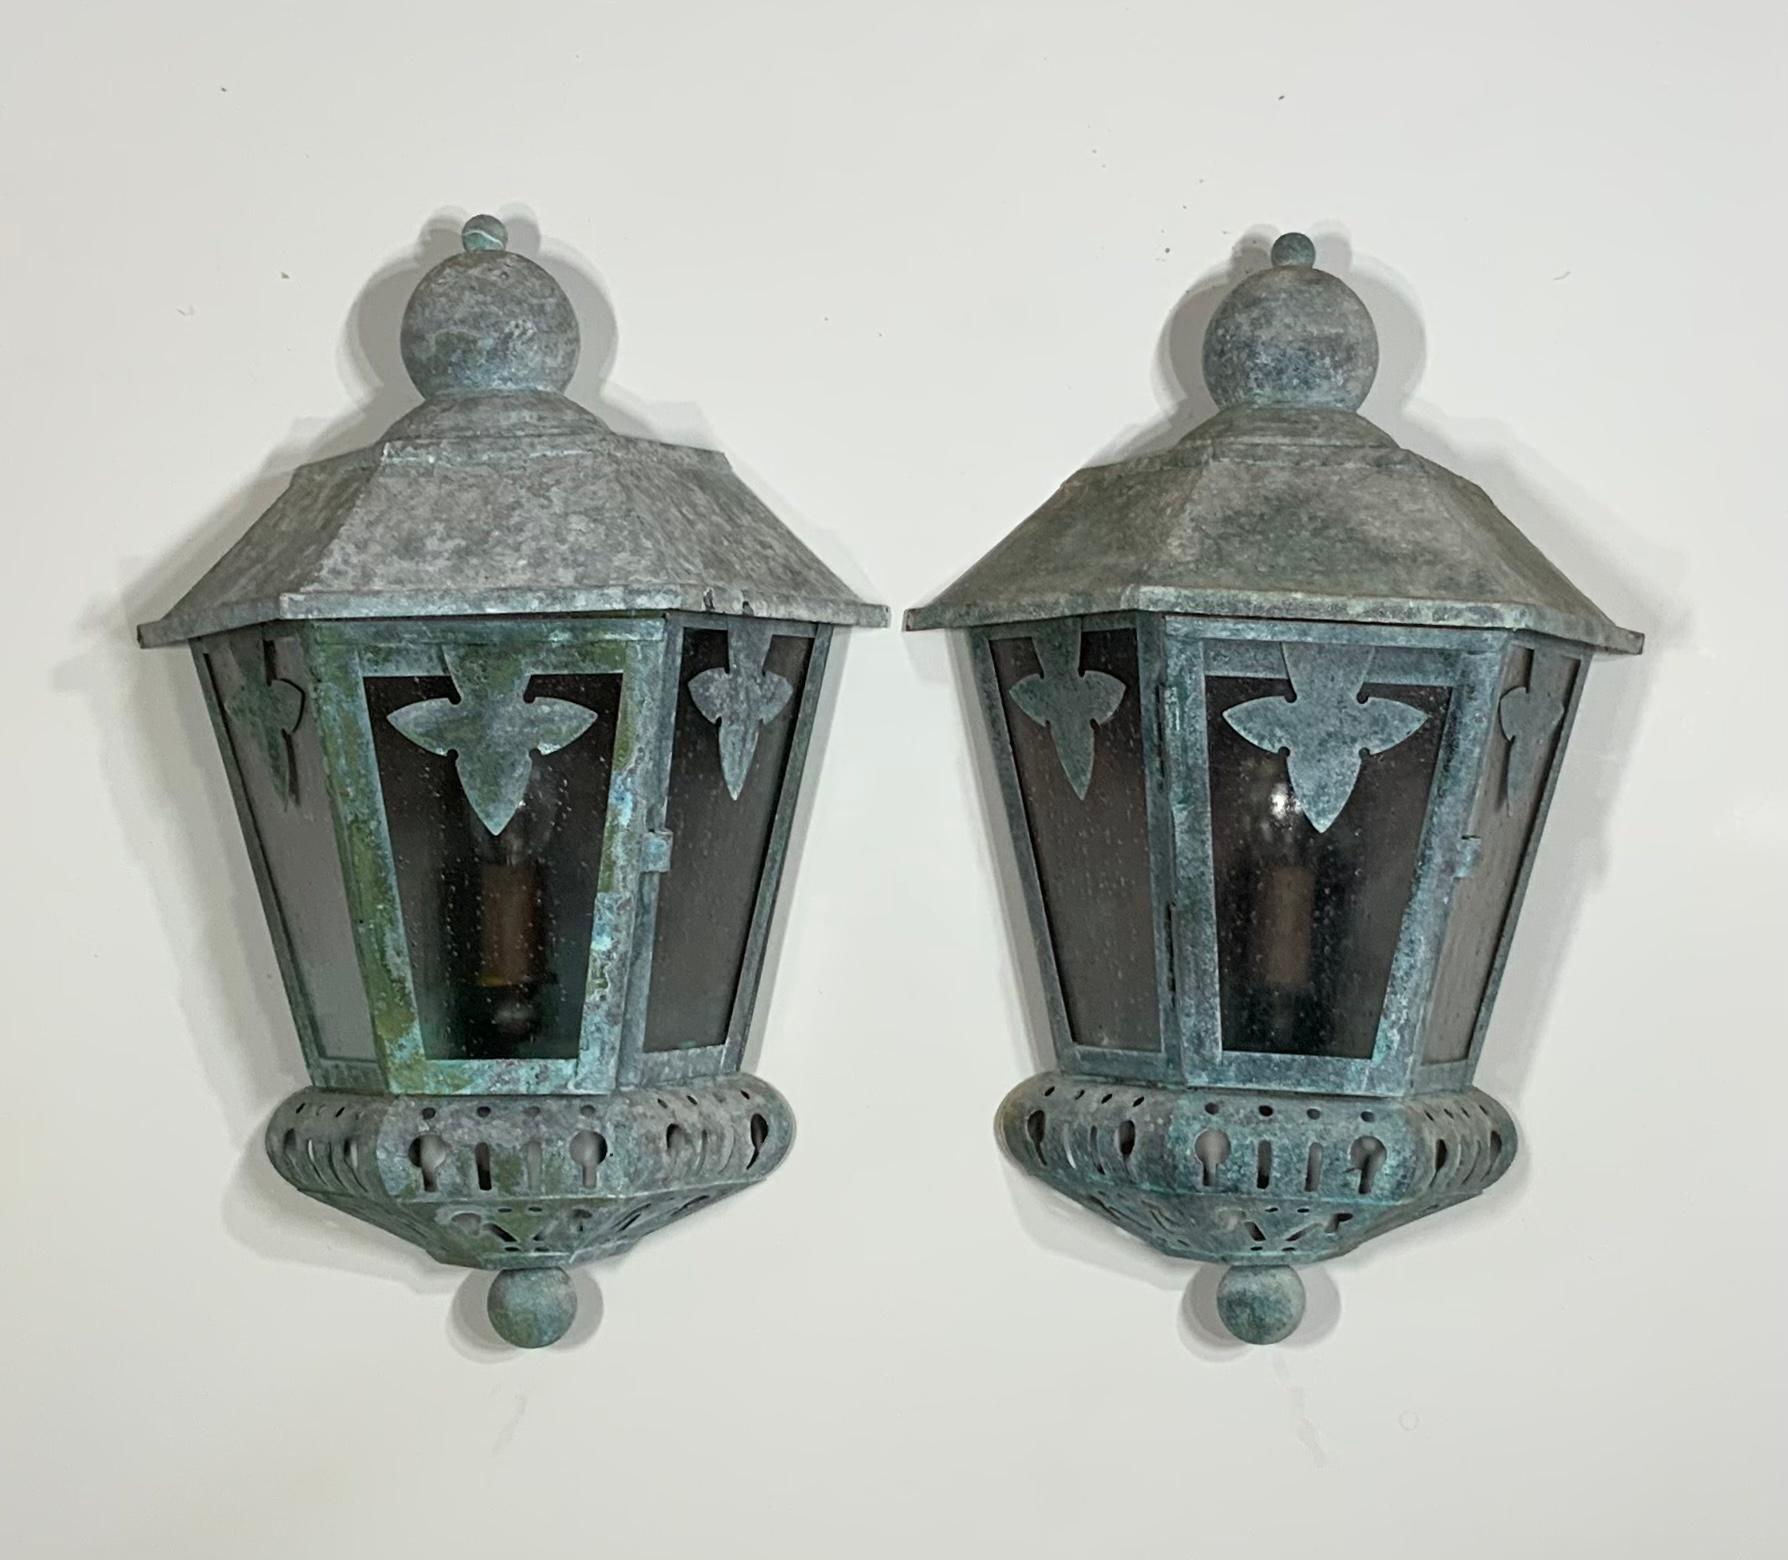 Beautiful pair of vintage wall lanterns Artistically hand crafted made from copper with one 60/watt light, and seeded acrylic glass like.
Exceptional original weather oxidised patina and colors, of turquoise green and gray.
Will look great indoor